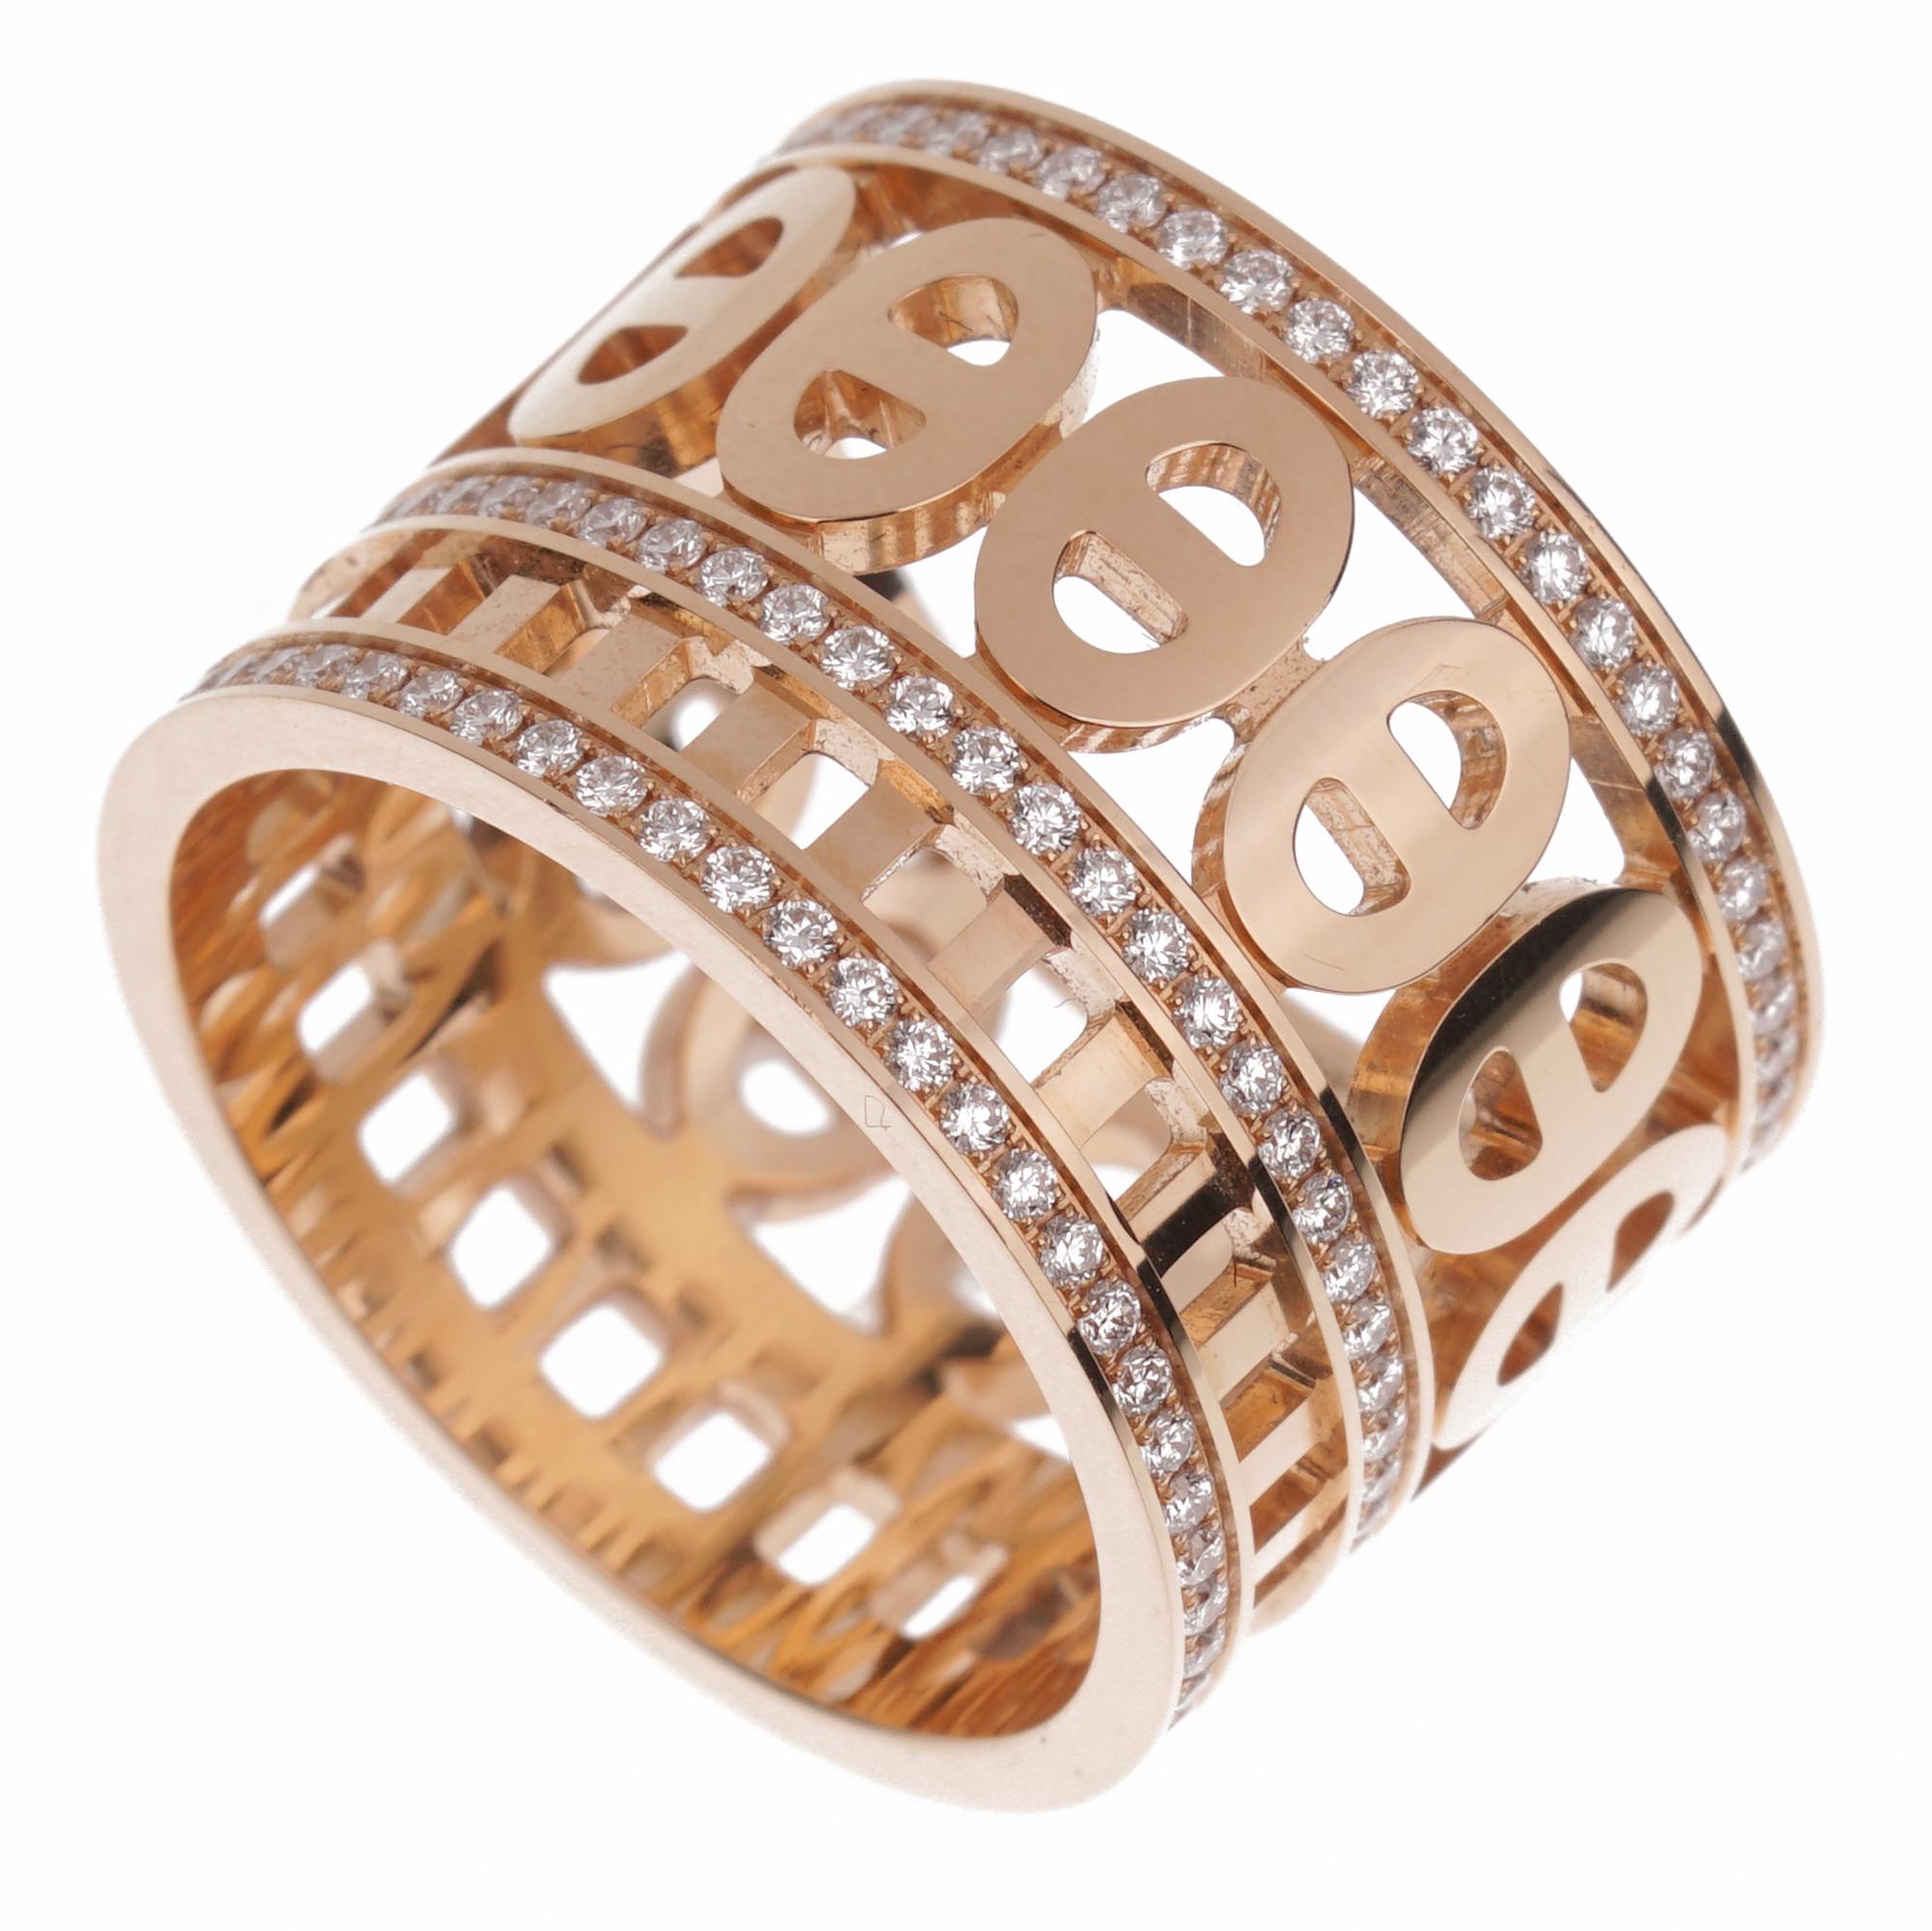 The Hermès Chaine d'Ancre Divine Rose Gold Diamond Ring is an exquisite masterpiece that embodies the pinnacle of luxury and craftsmanship. This remarkable piece of jewelry draws inspiration from the iconic Chaine d'Ancre motif, a hallmark of